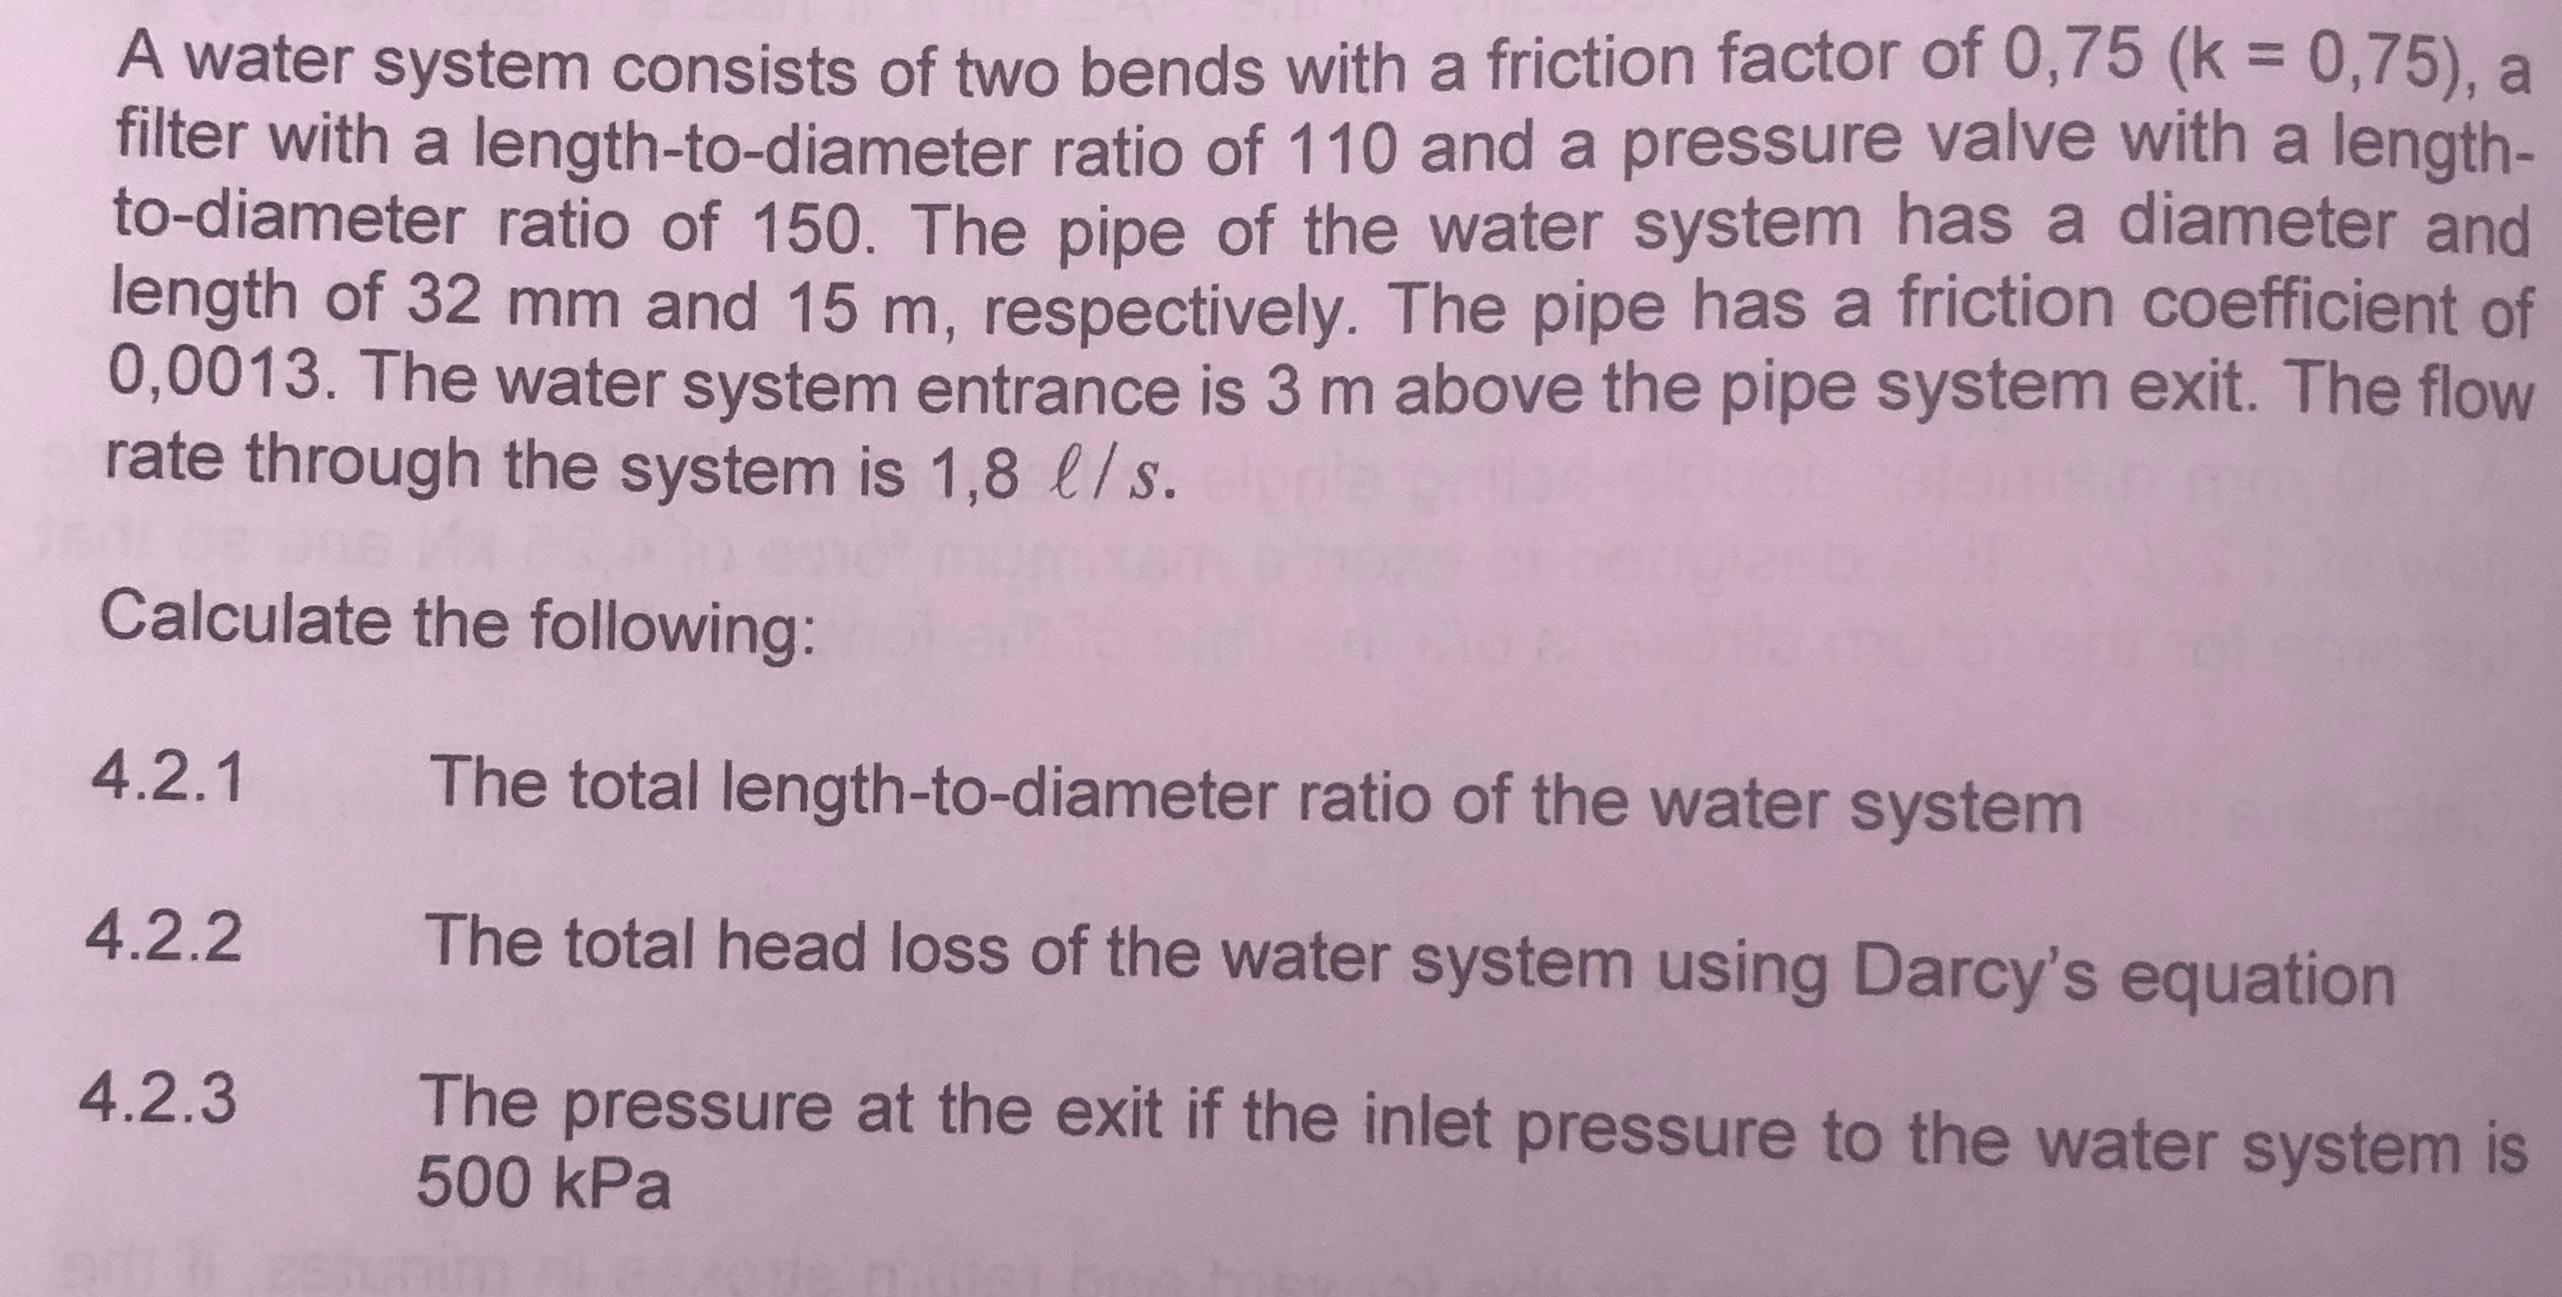 A water system consists of two bends with a friction factor of 0,75 (k = 0,75), a filter with a